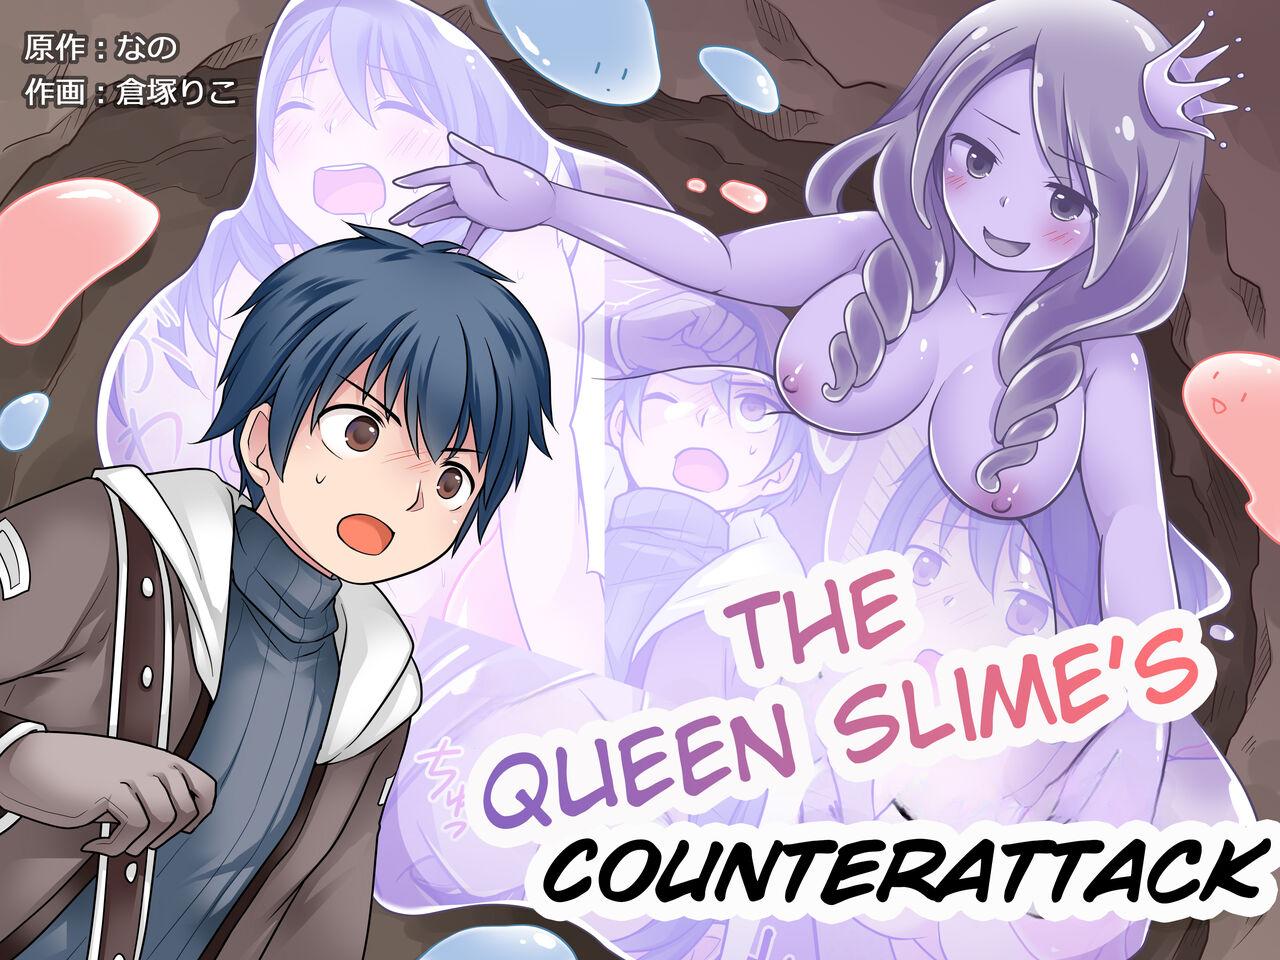 Gay Queen Slime no Gyakushuu | The Queen Slime's Counterattack - Original Linda - Picture 1